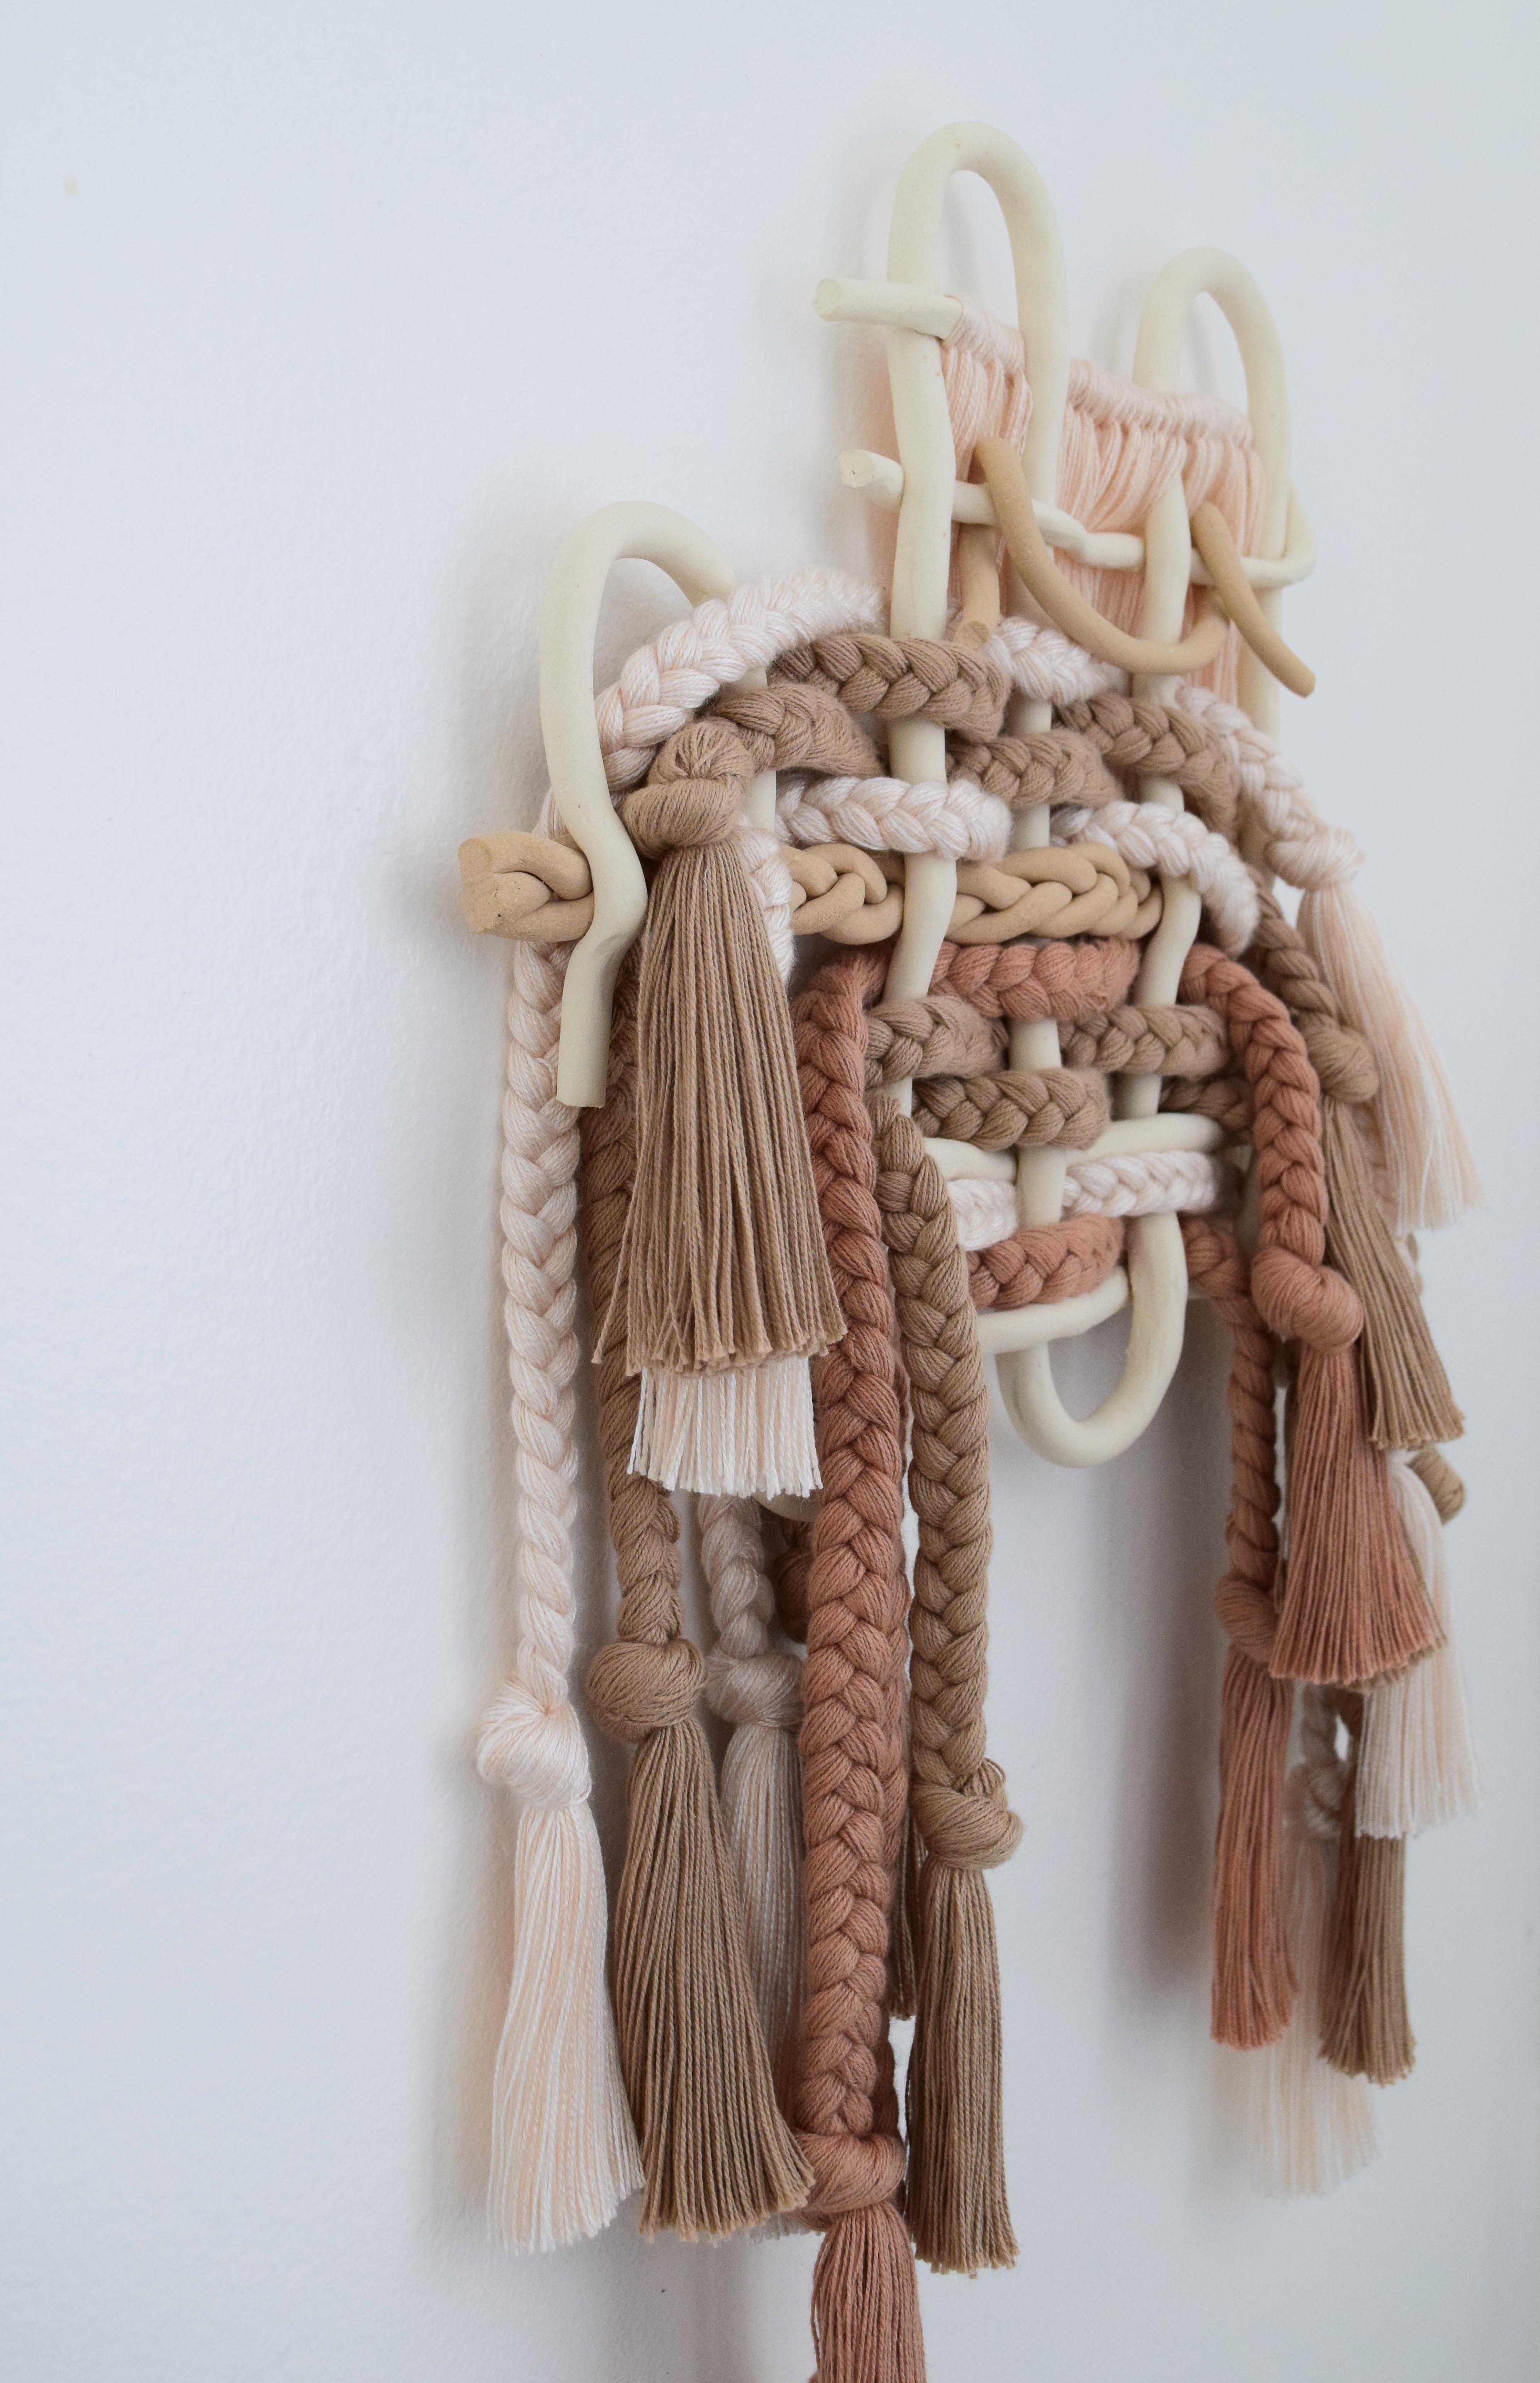 One of a Kind Wall Sculpture #627 By Karen Gayle Tinney

One of a Kind wall sculpture in mixed materials of ceramic and braided cotton/tencel fibers. A woven ceramic panel is intertwined with braids of cotton and tencel in warm neutral colors. The